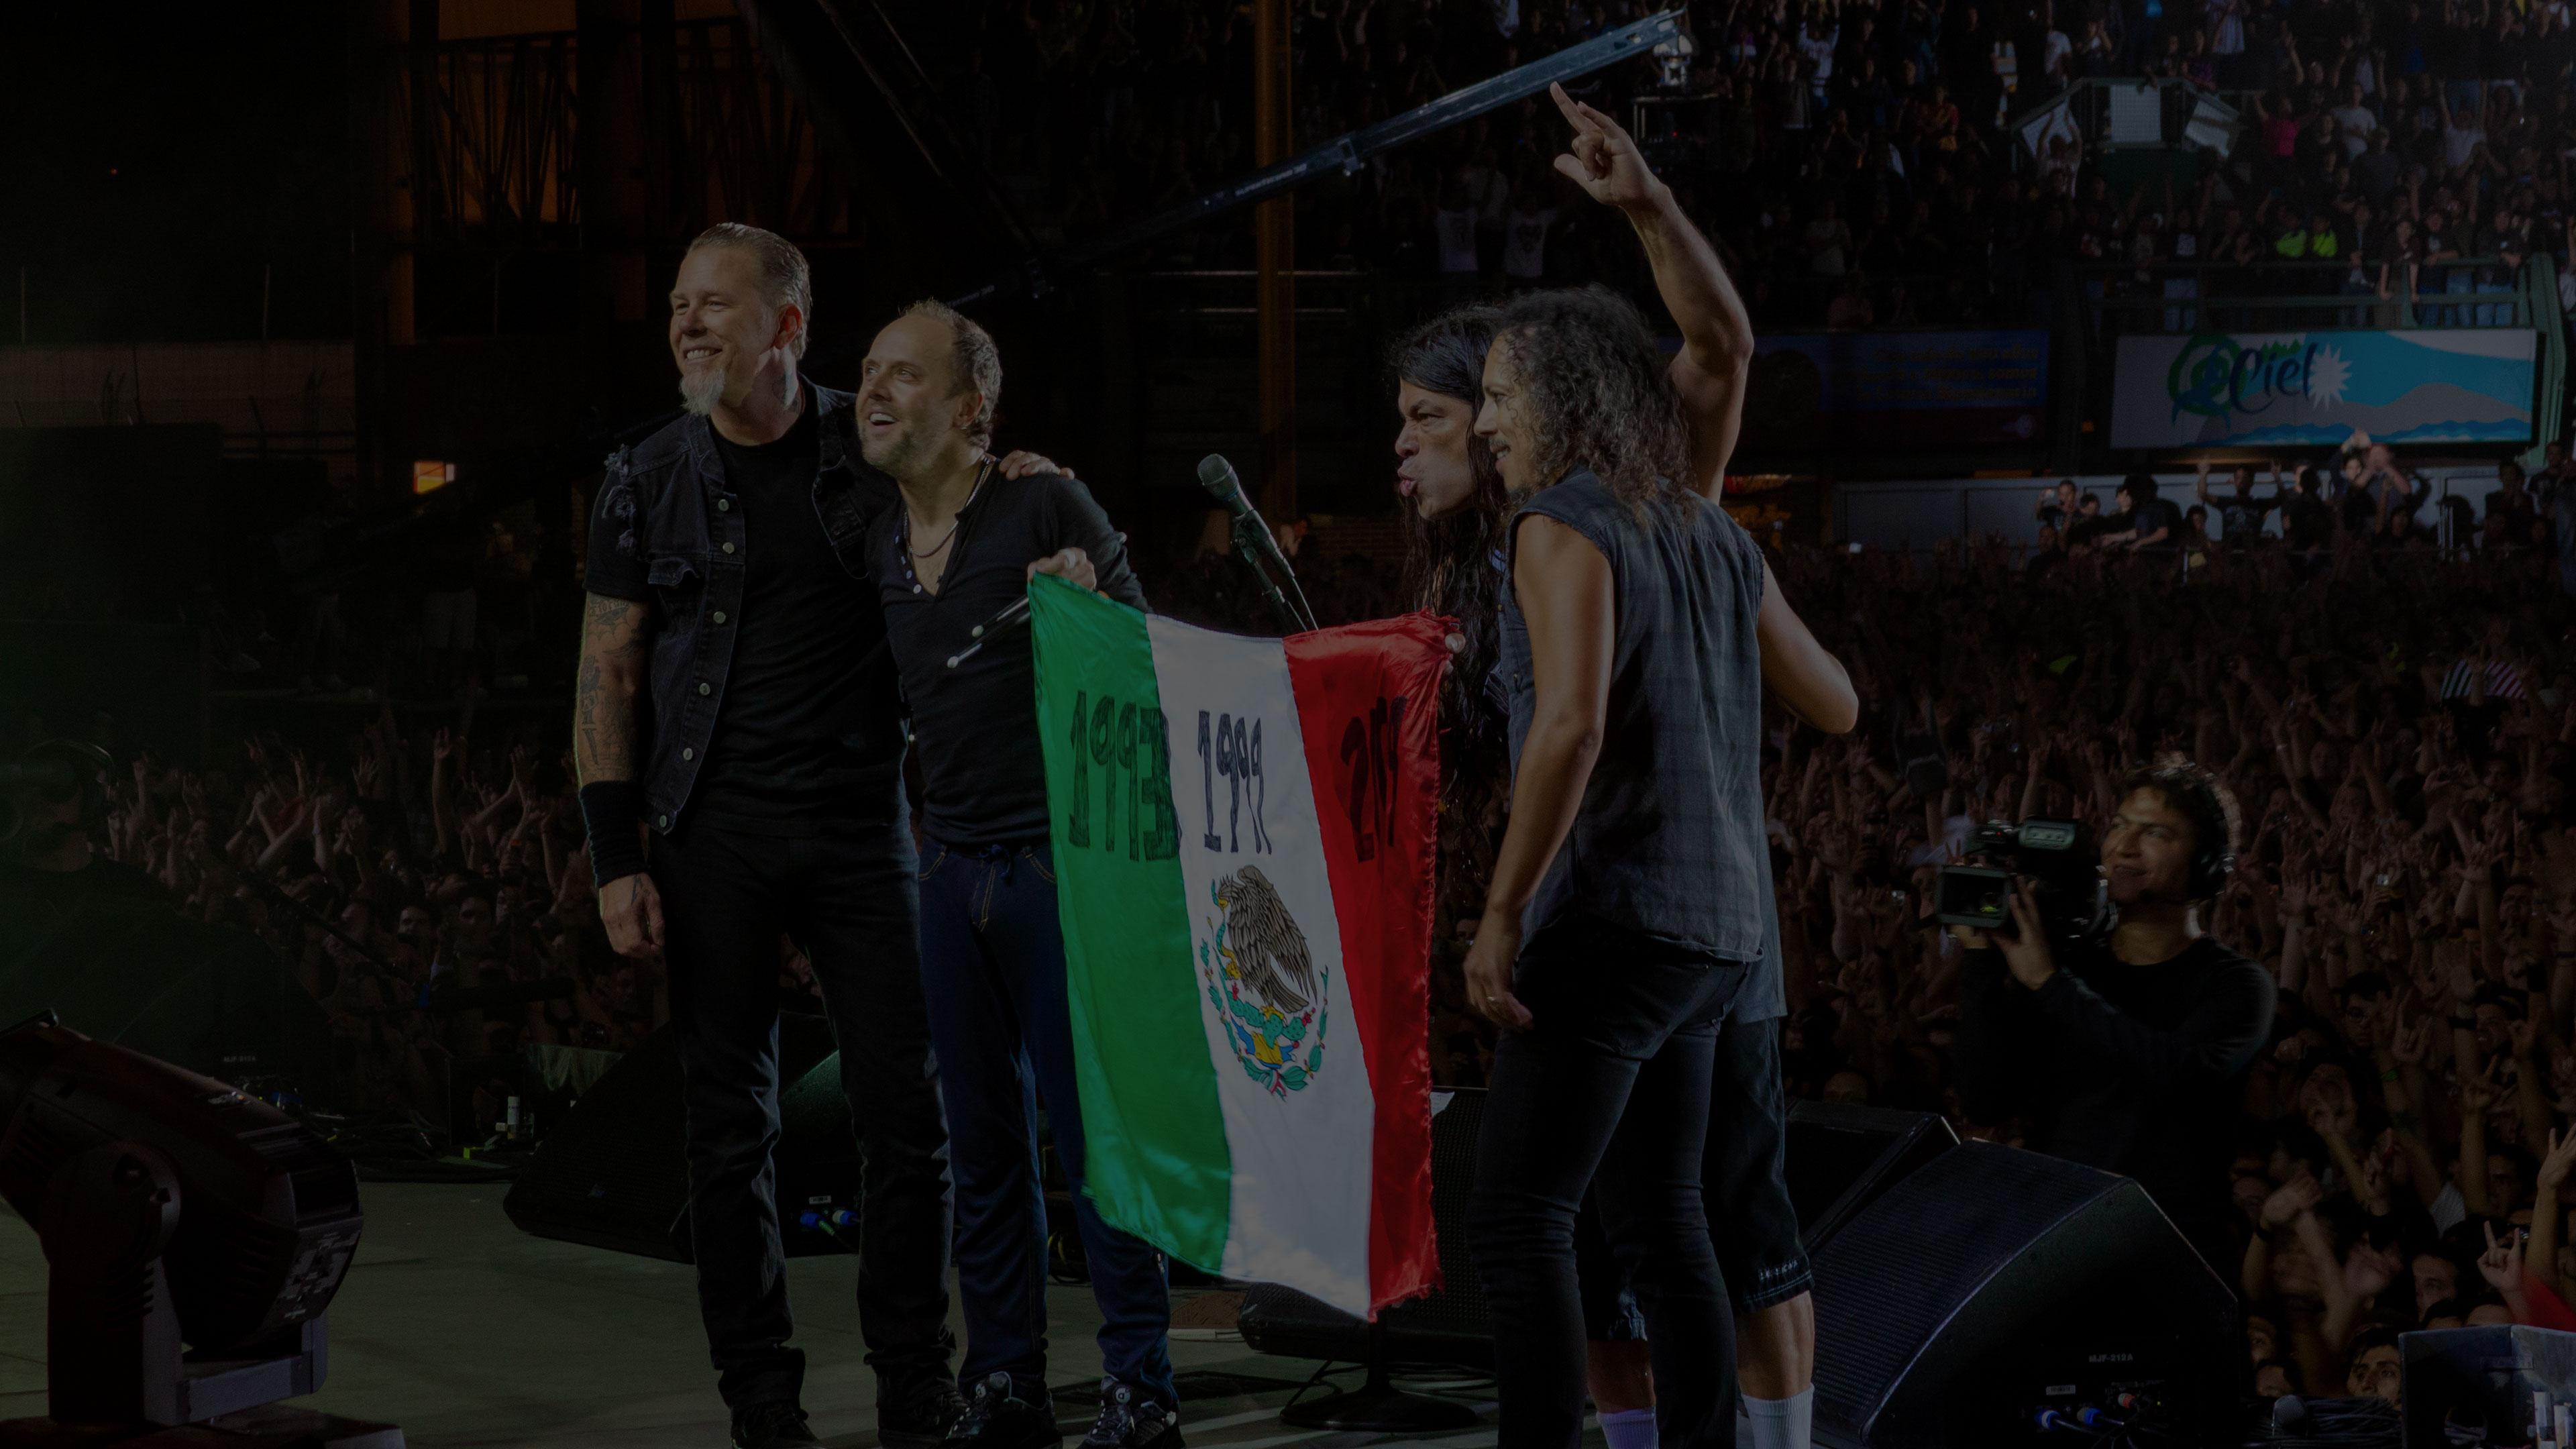 Metallica at Foro Sol in Mexico City, Mexico on June 7, 2009